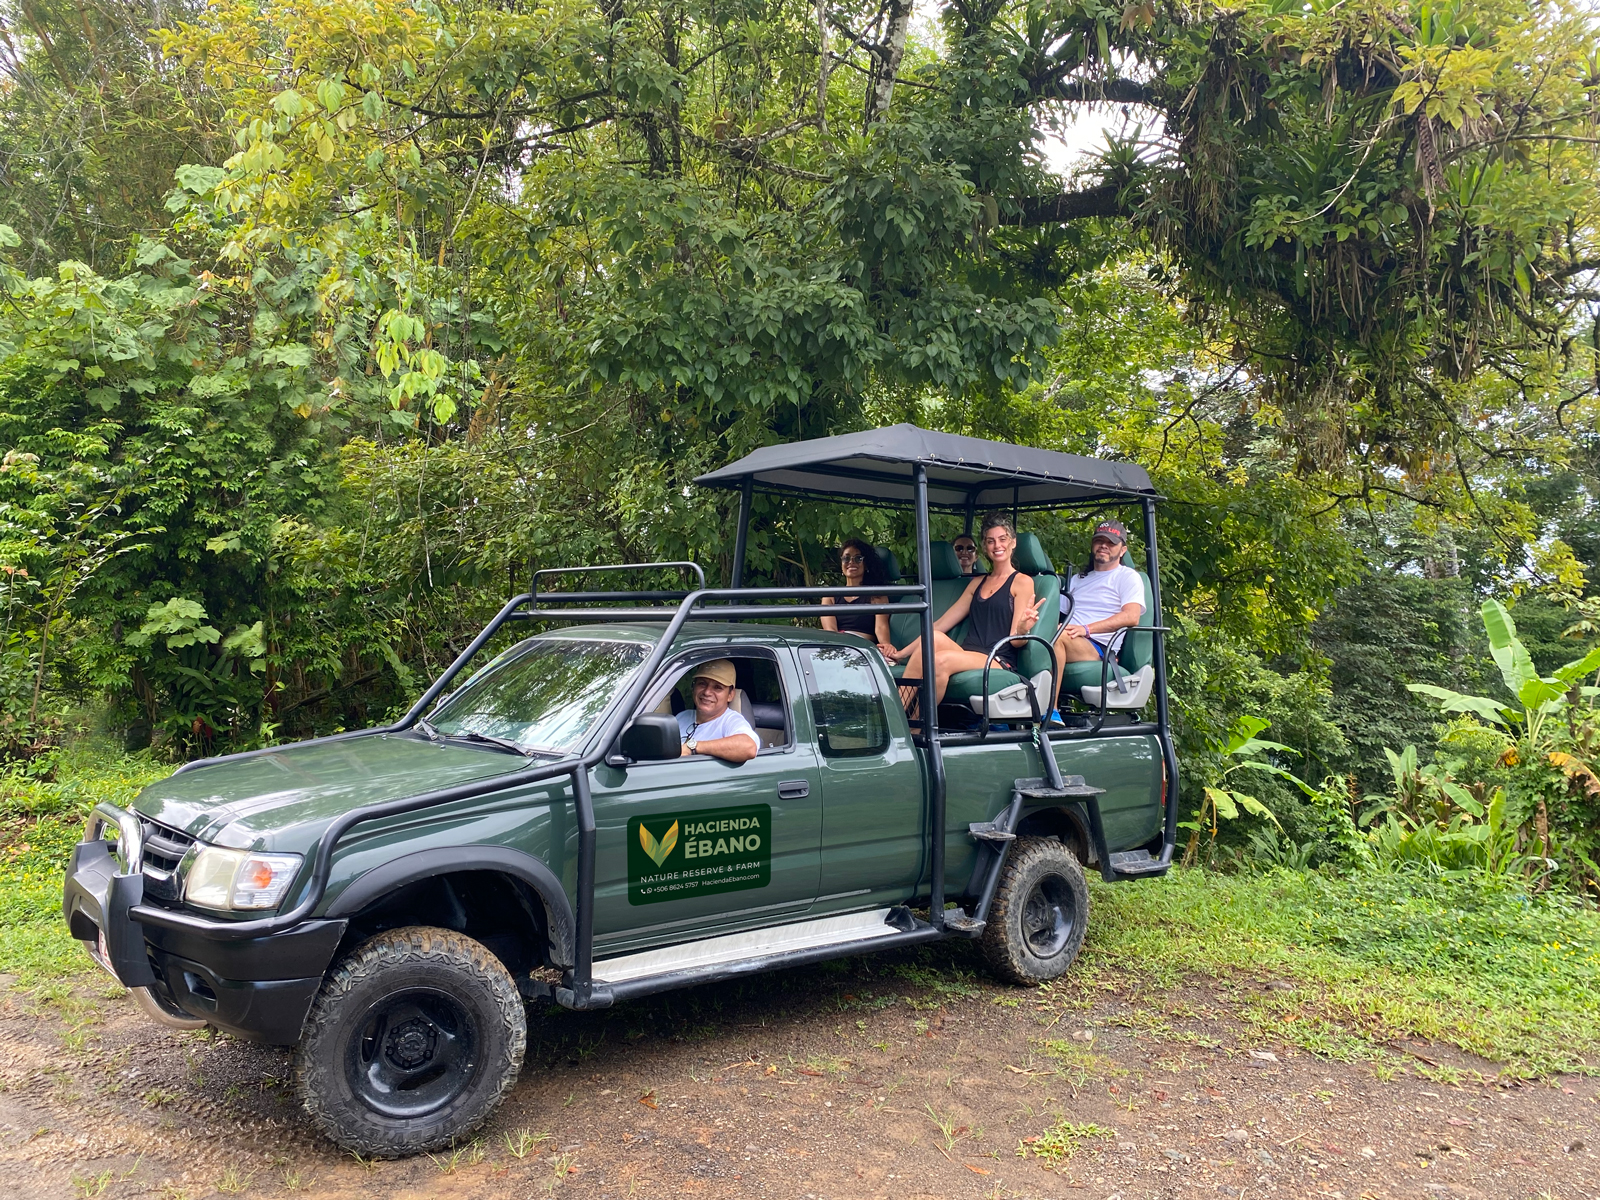 Guests departing from the reception area and heading to Hacienda Ébano Nature Reserve and Farm